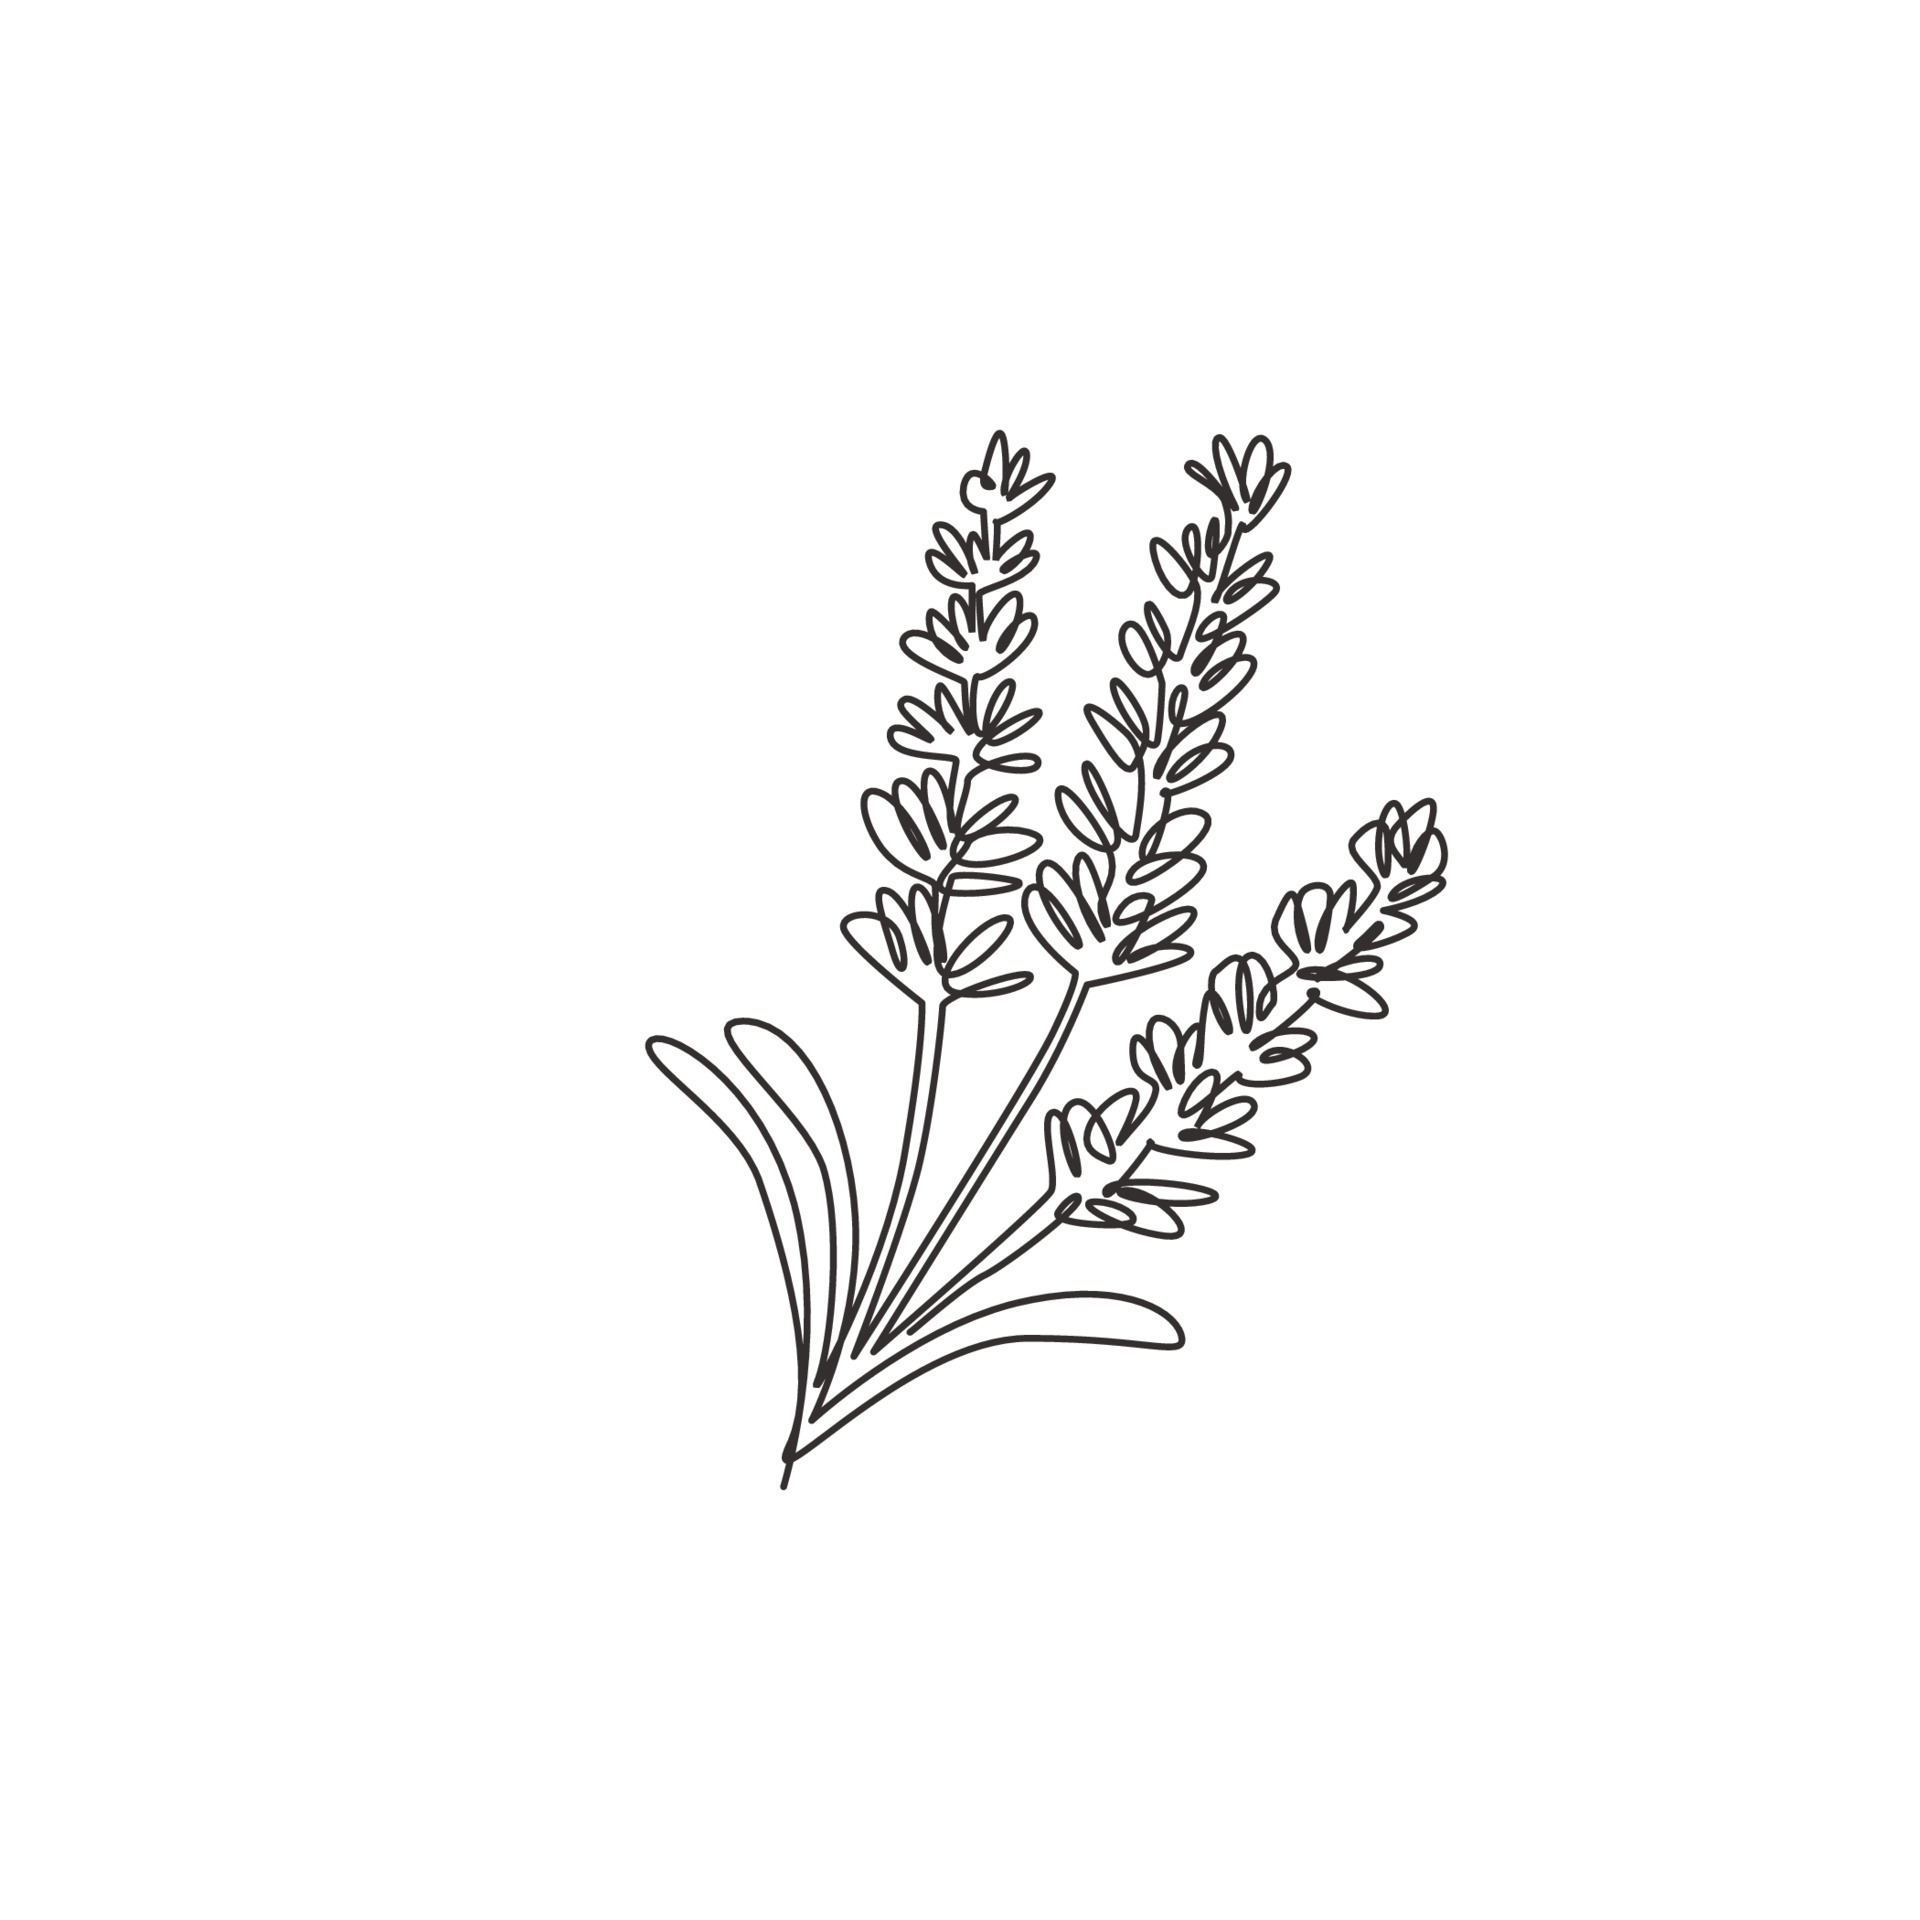 Top more than 83 lavender flower sketch latest - in.eteachers